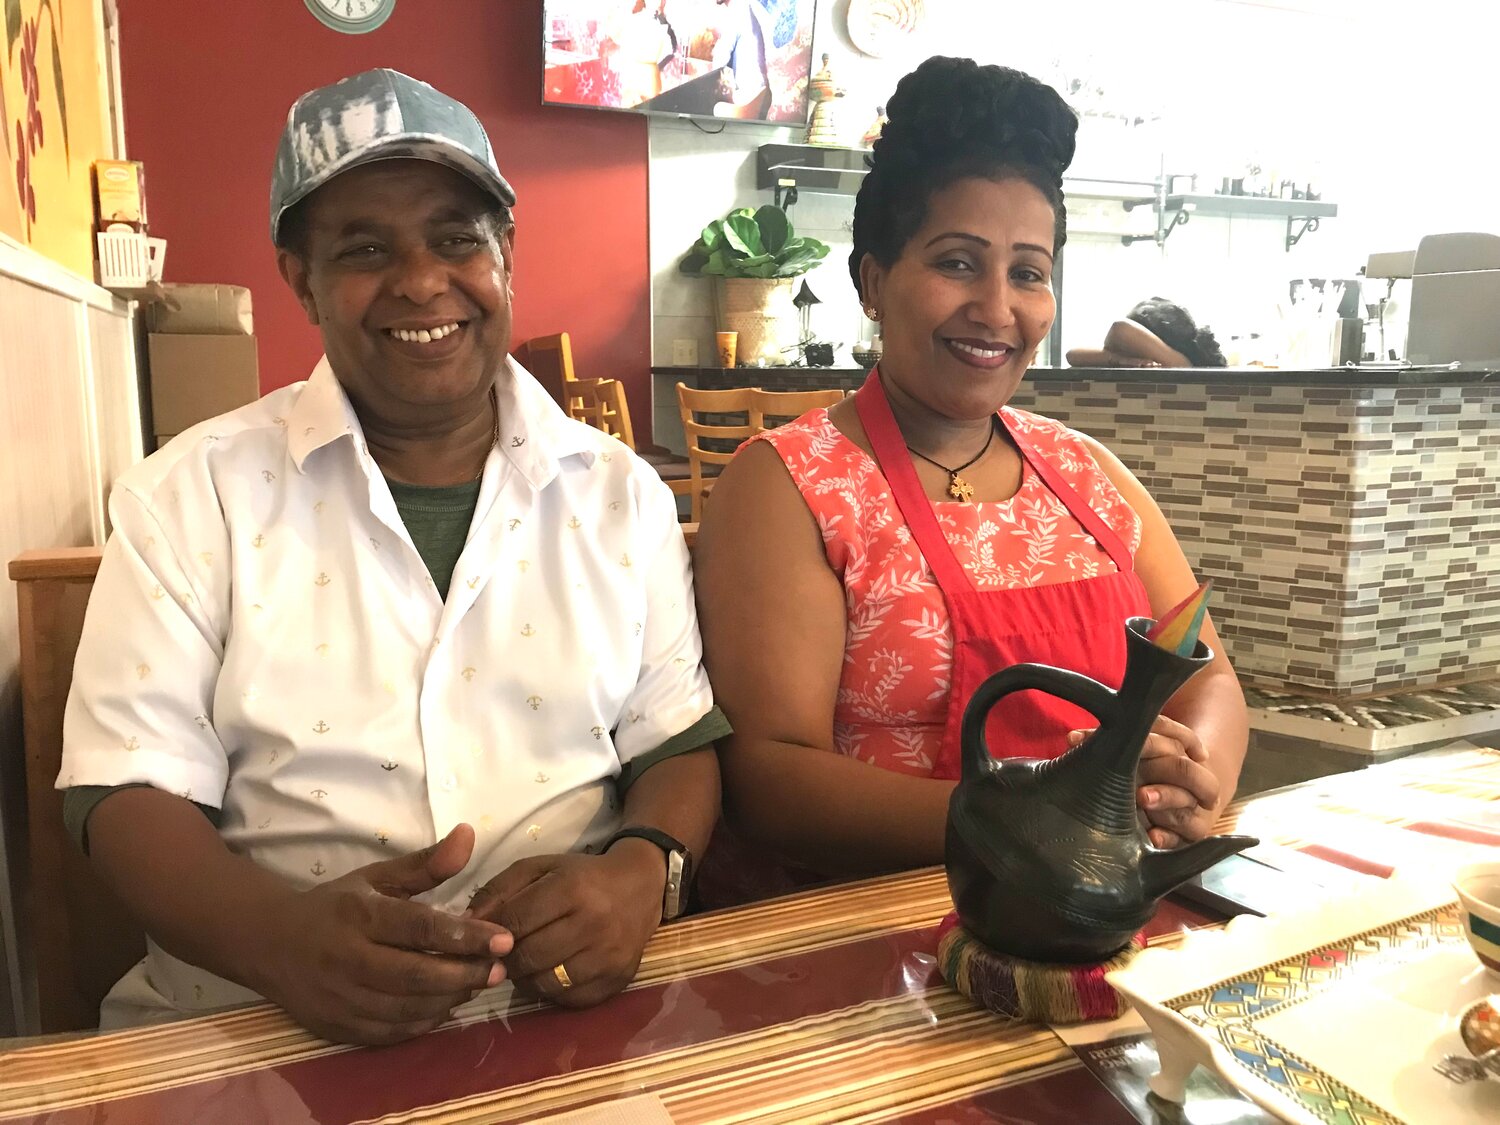 Some 40 years after Belai Mergia (left) escaped from war-torn Ethiopia, he, the dreamer, and Rahel, the culinary artist who dreamt with him, offer sumptuous meals in a restaurant where patrons are invited to dine in or take out. And enjoy.